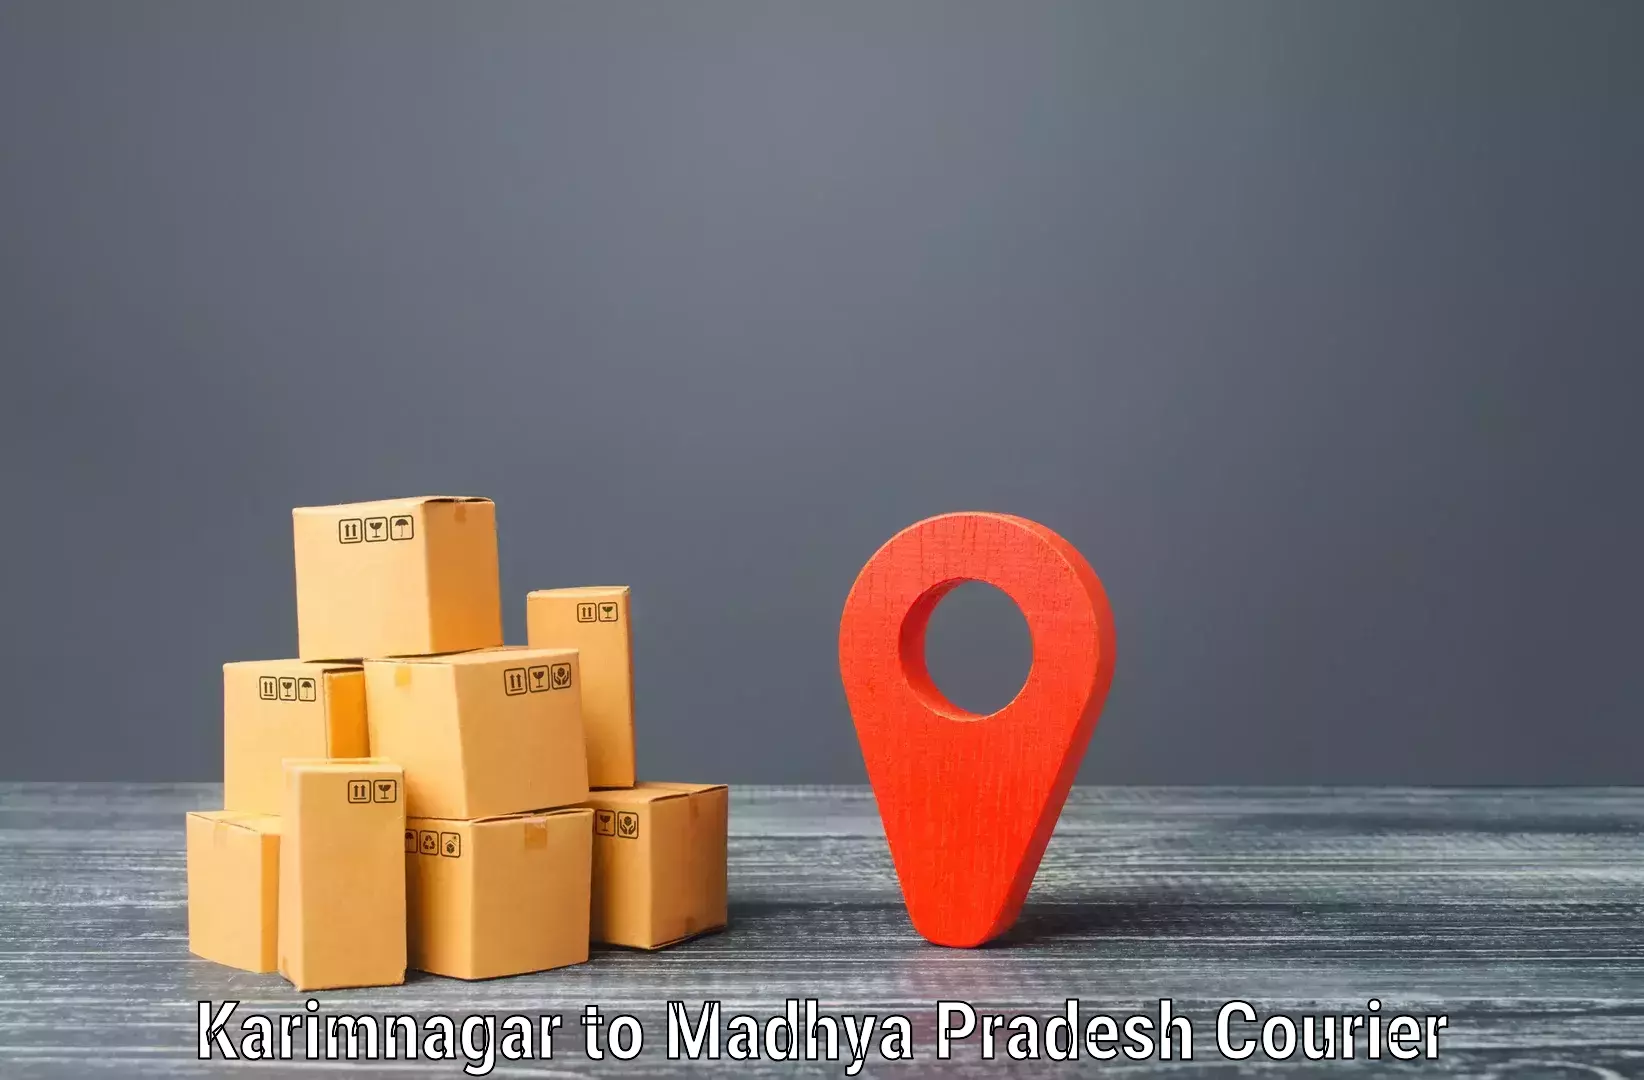 Sustainable shipping practices in Karimnagar to Indore